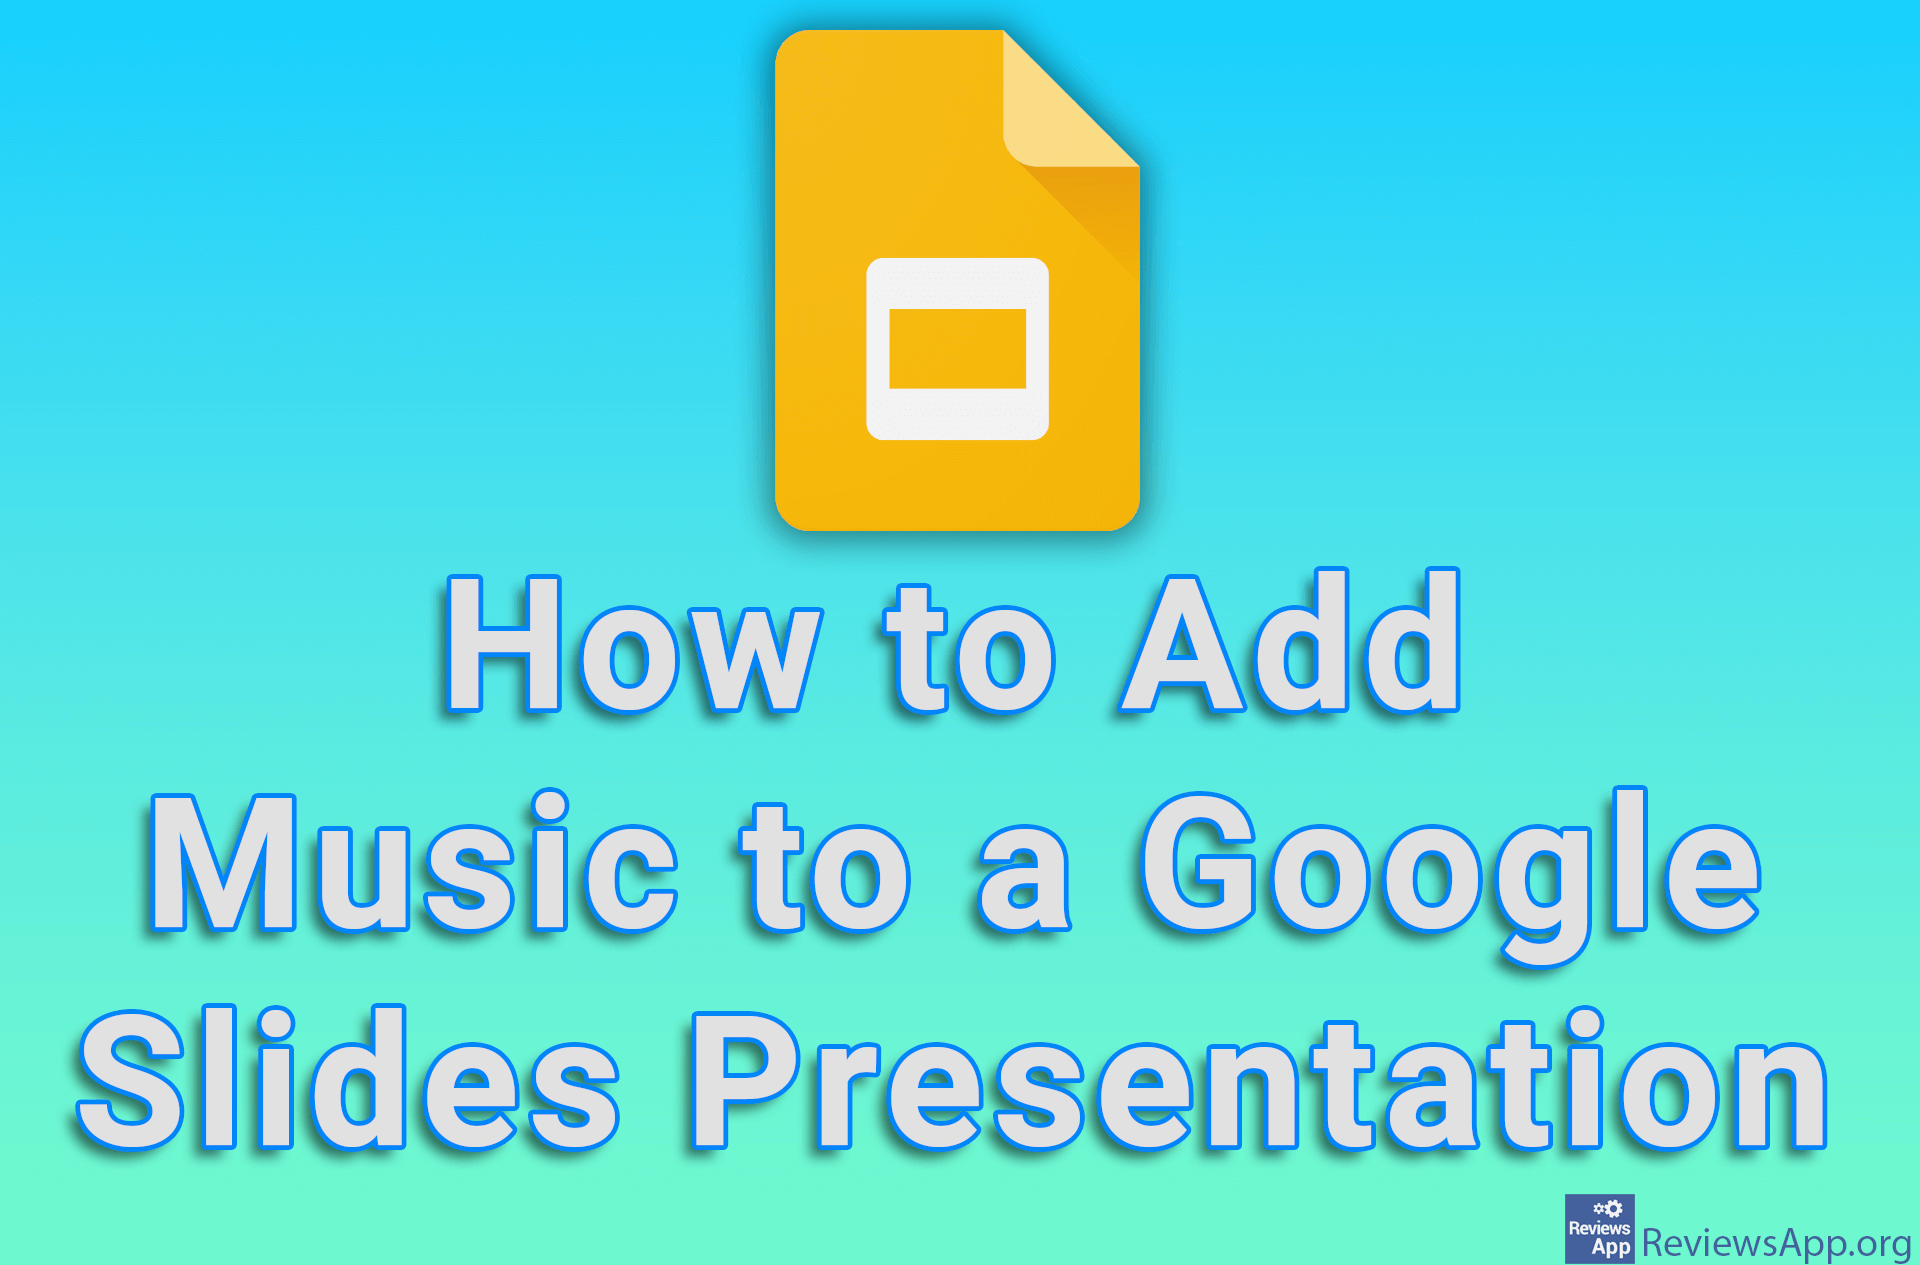 How to Add Music to a Google Slides Presentation